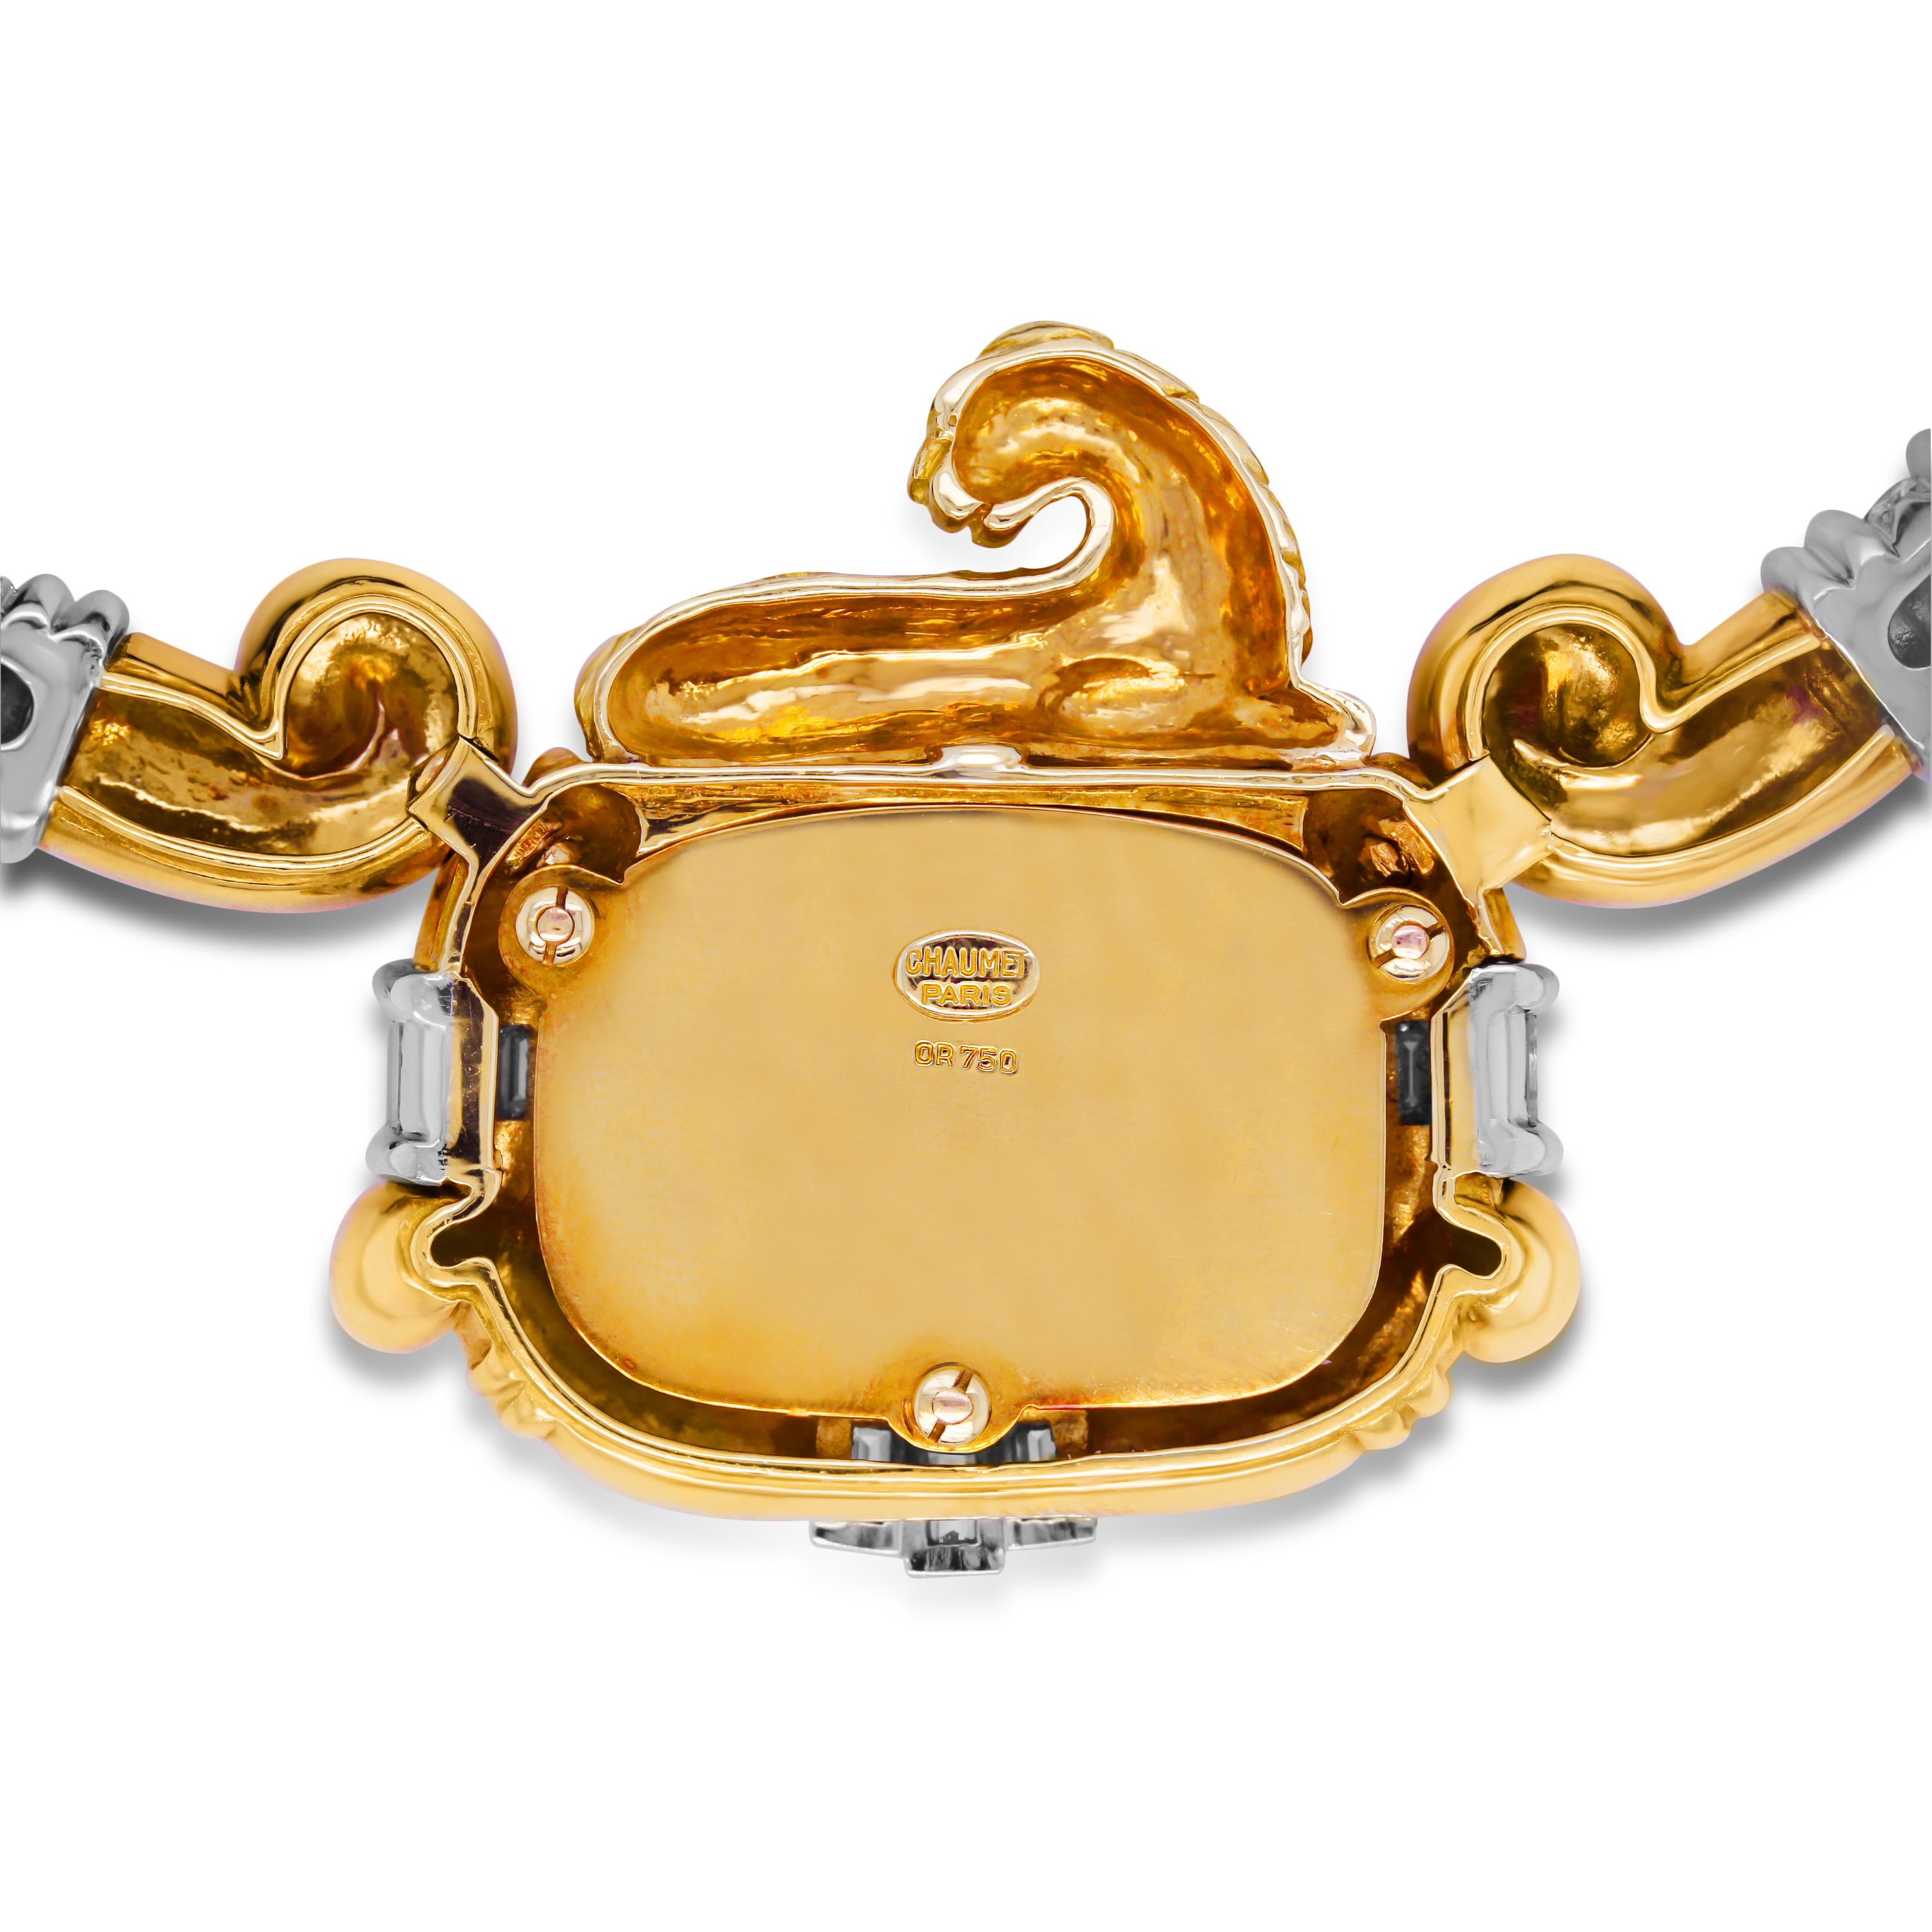 Chaumet 18K Gold Round and Baguette Diamonds Lion Pendant Necklace

This state-of-the-art pendant features a lion pendant along with two diamond set attachments on a chord.

Apprx. 3.50 carat F-G color, VS clarity round and baguette diamonds total